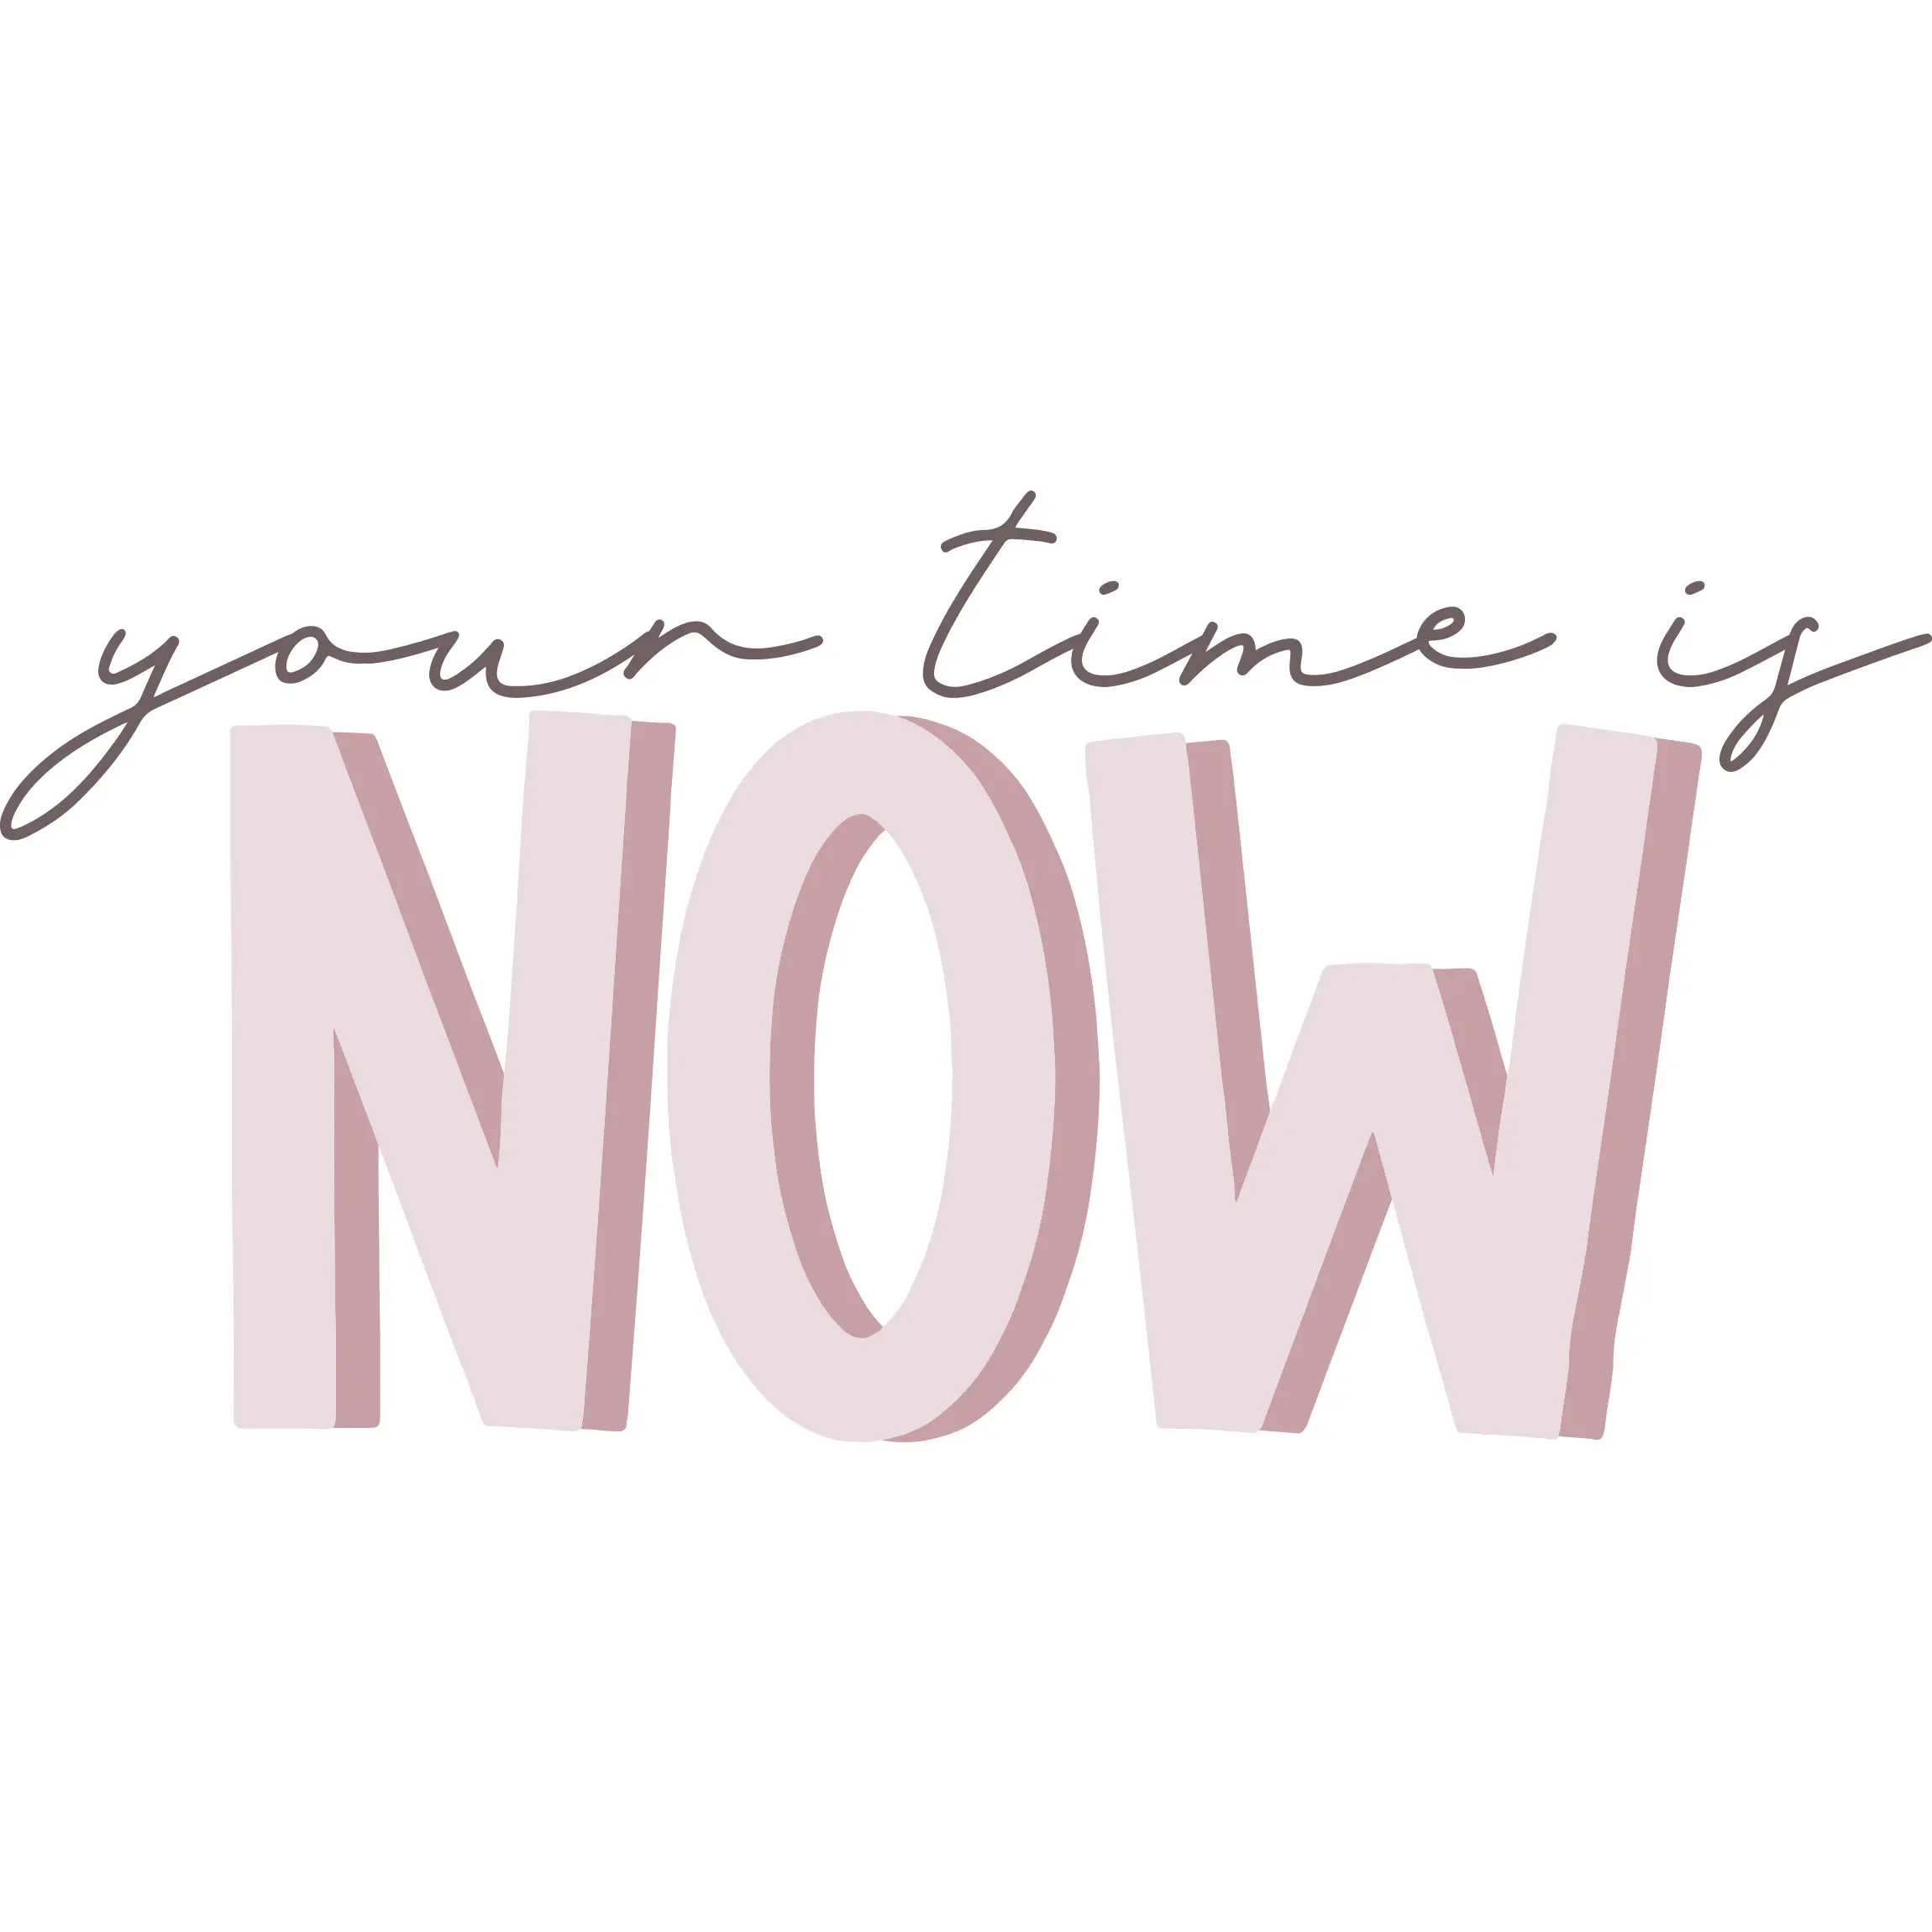 Your now is time